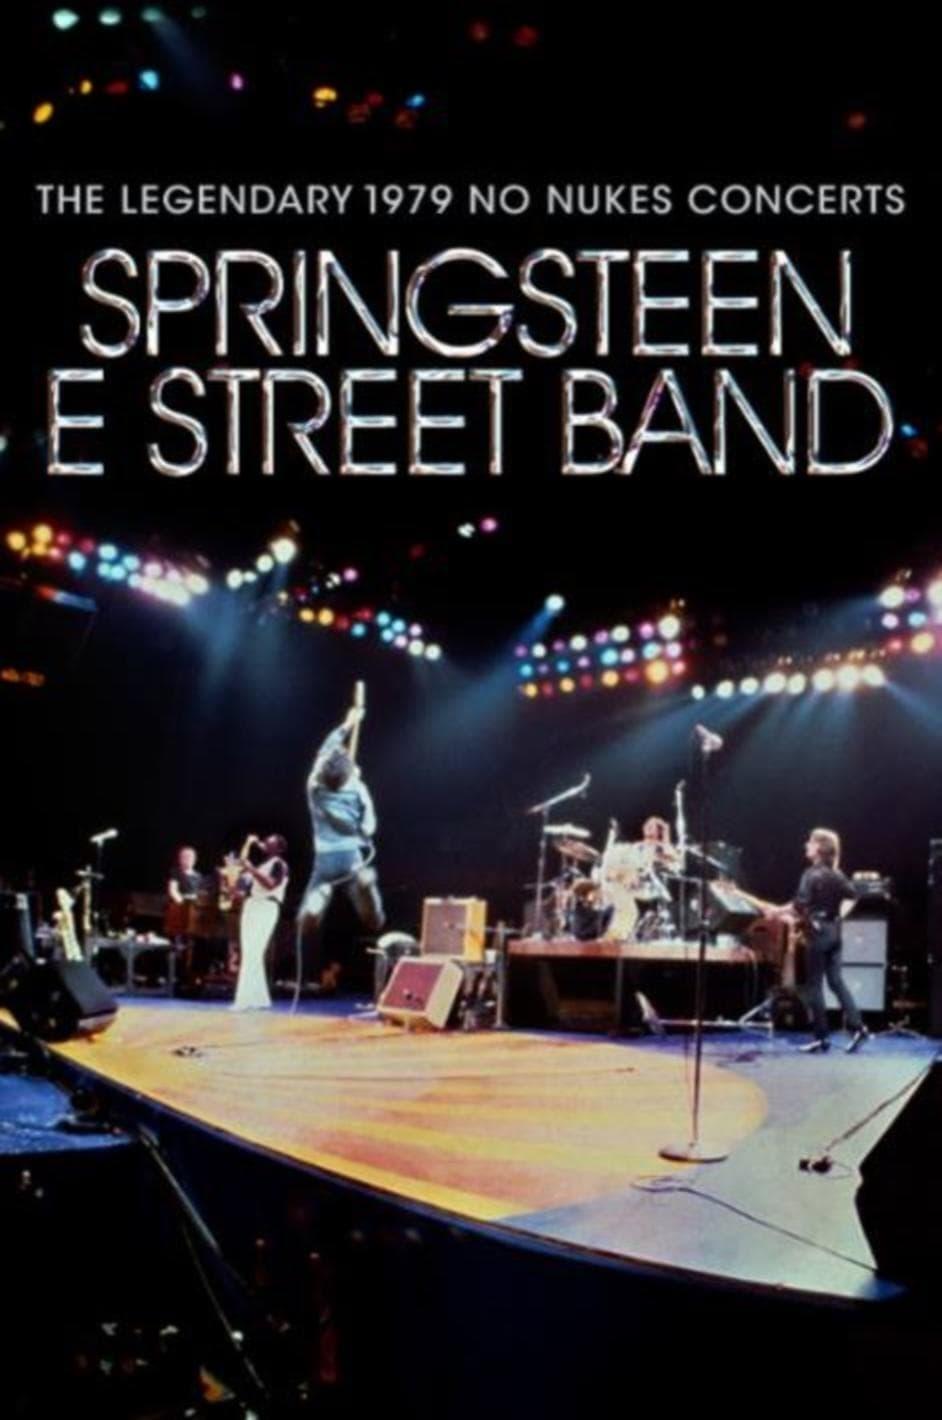 Bruce Springsteen & The E Street Band - The Legendary 1979 No Nukes Concerts poster